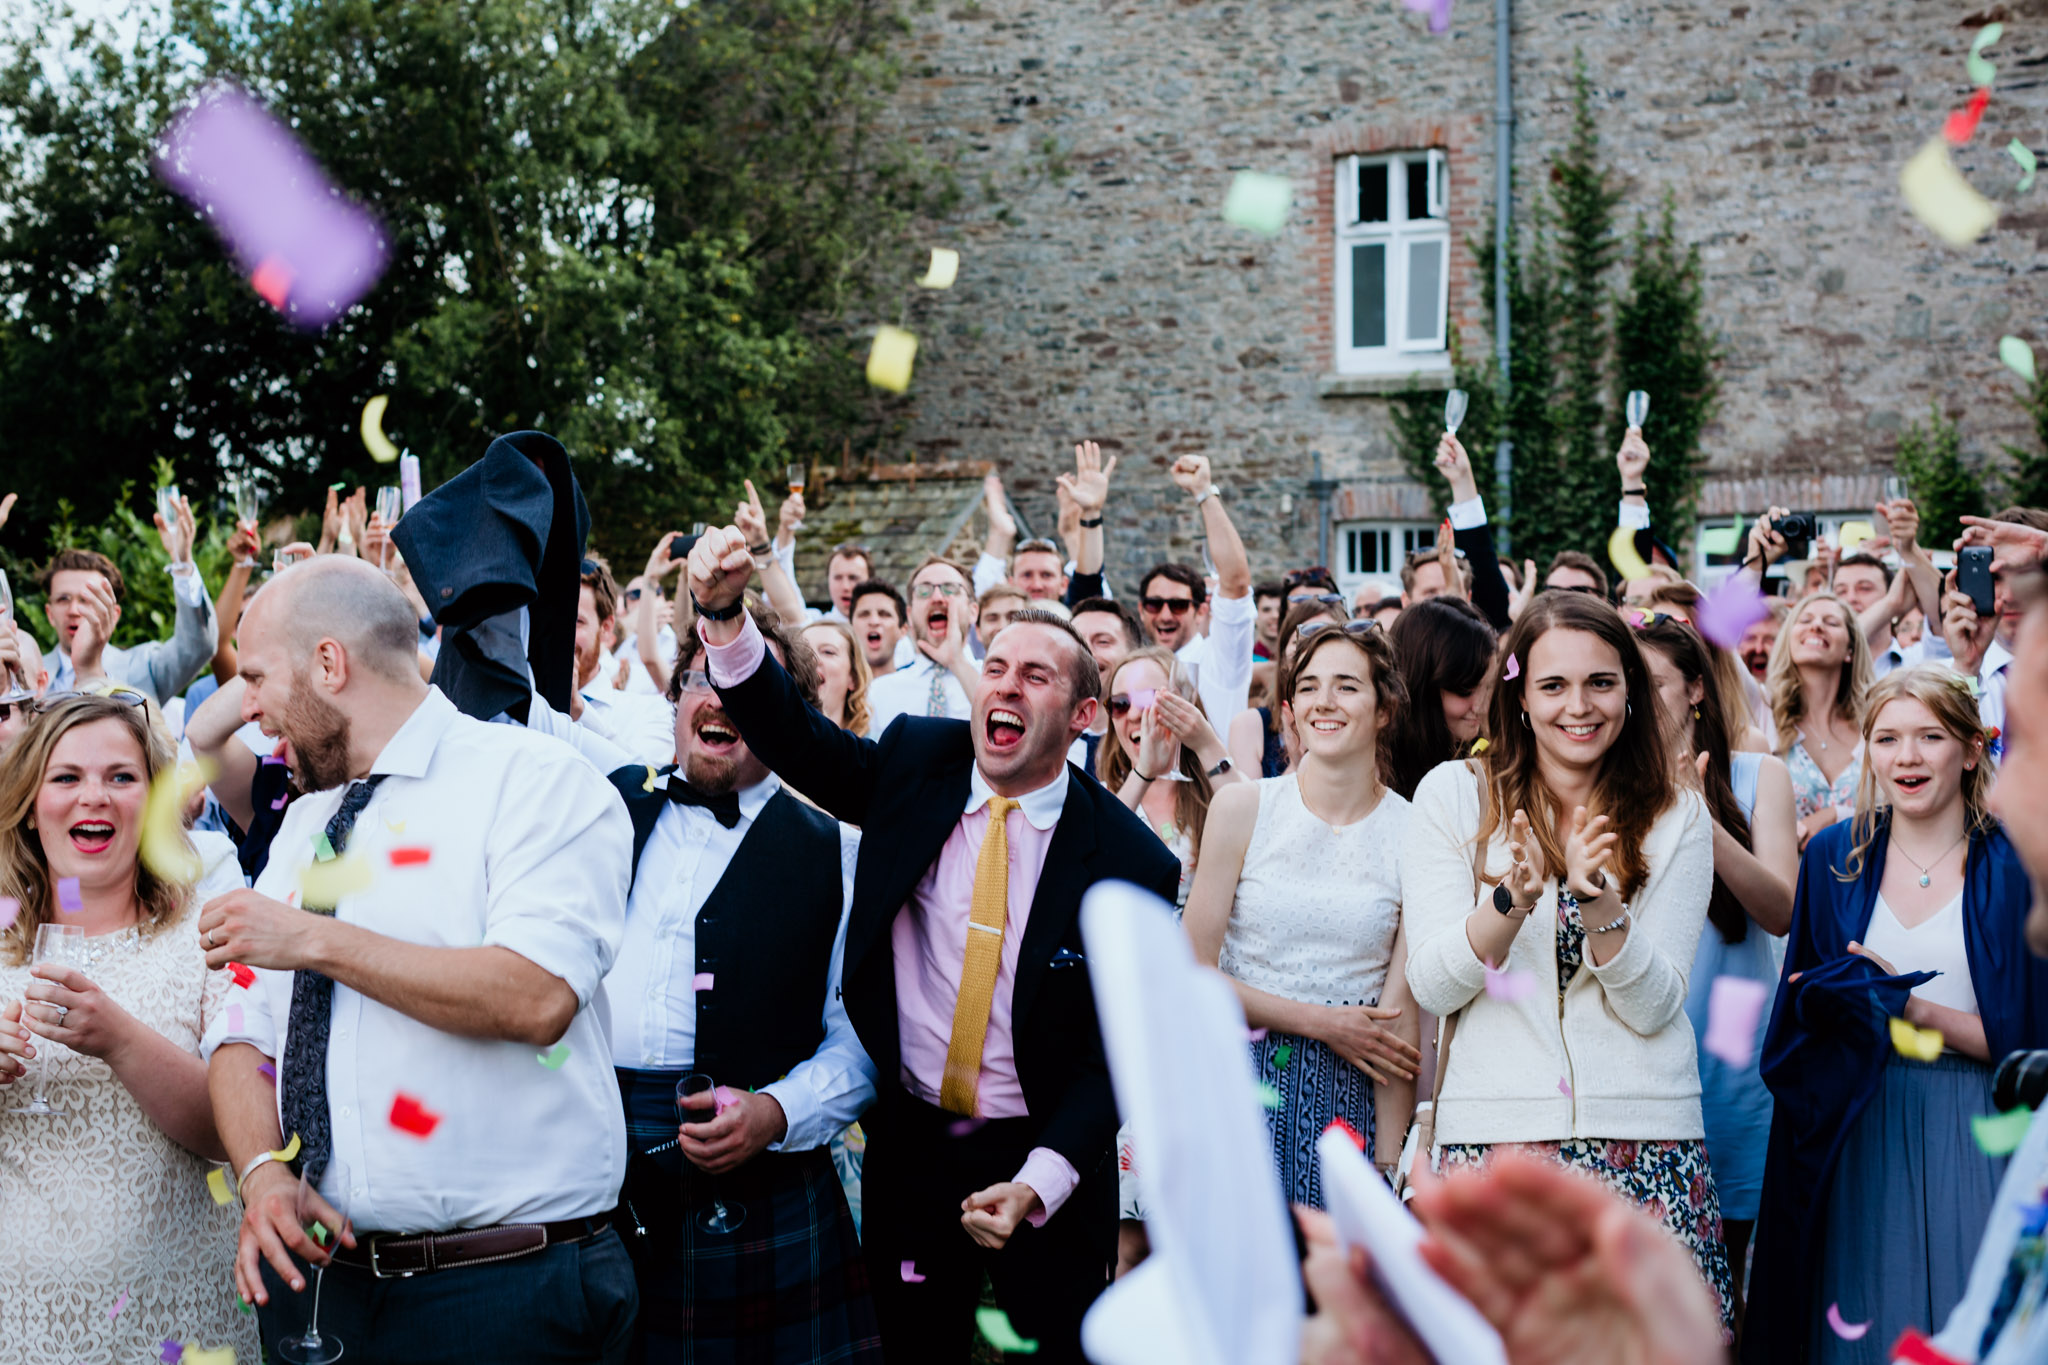 confetti canons go off and guests all celebrate at anran summer wedding devon